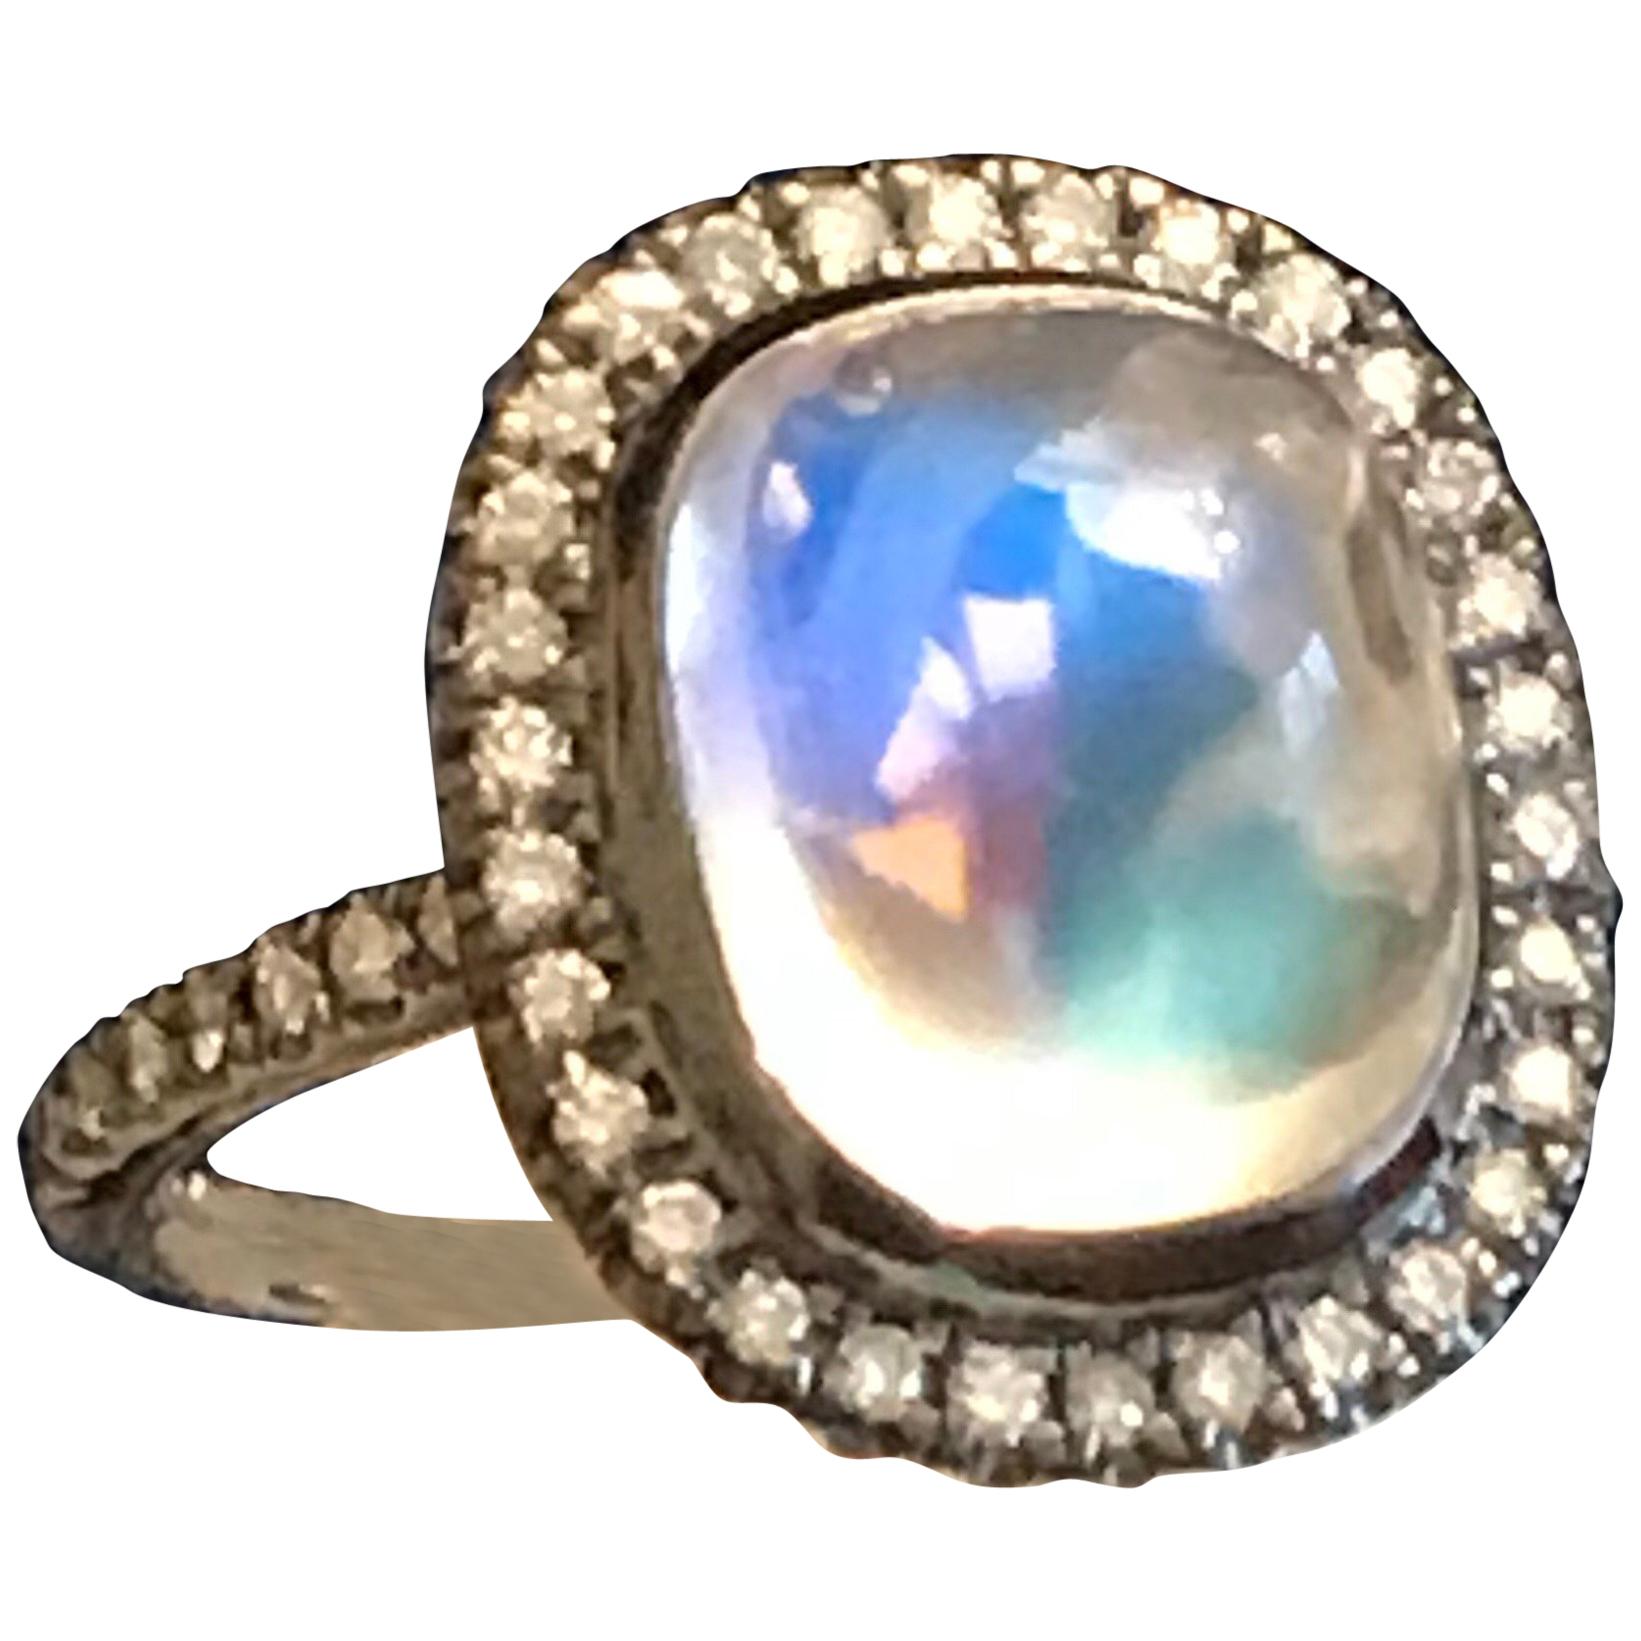 Bella Campbell/Campbellian, Statement Rainbow Moonstone Ring with Diamond Accent